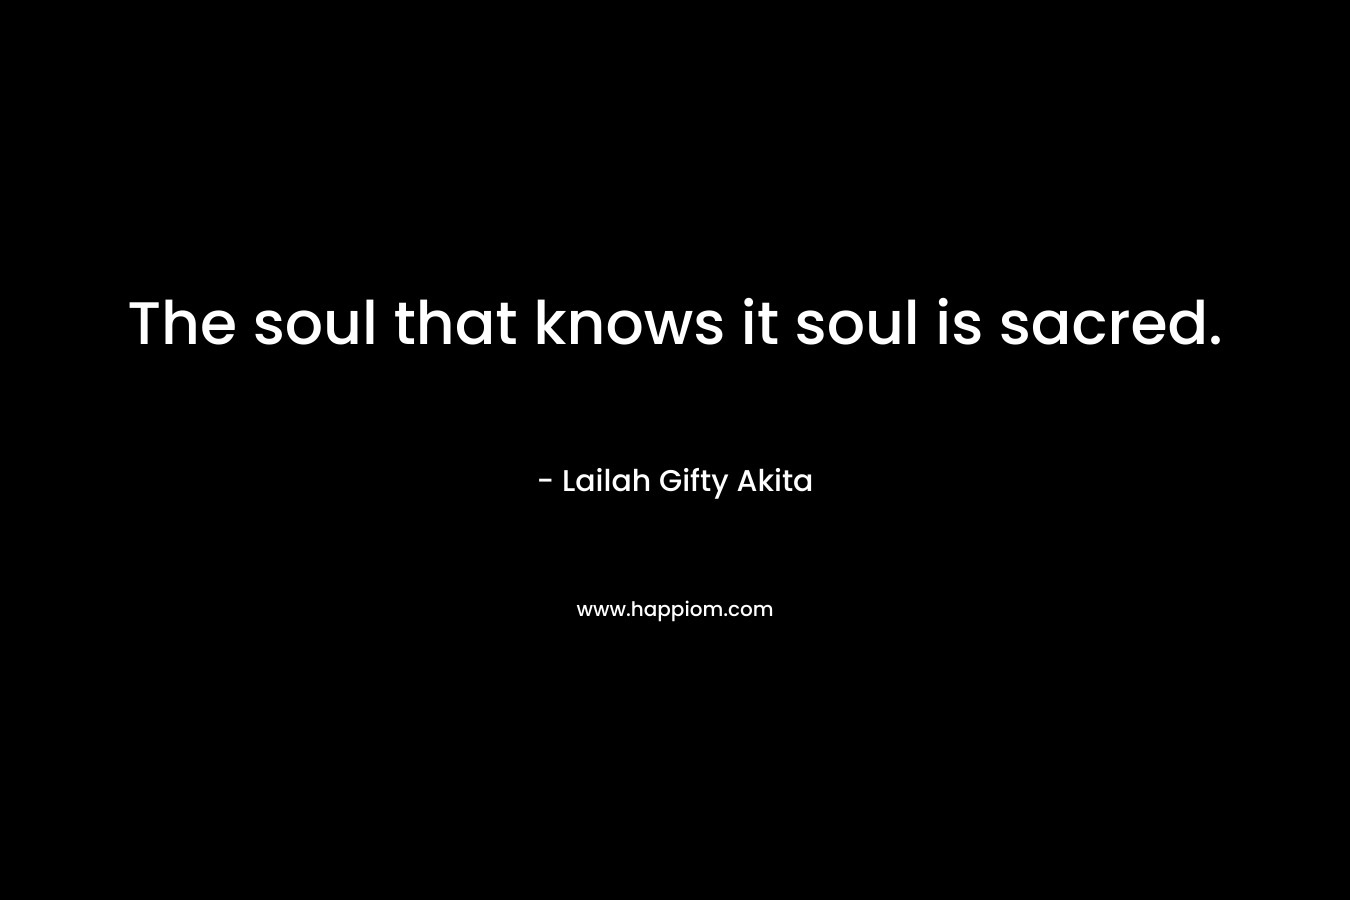 The soul that knows it soul is sacred.